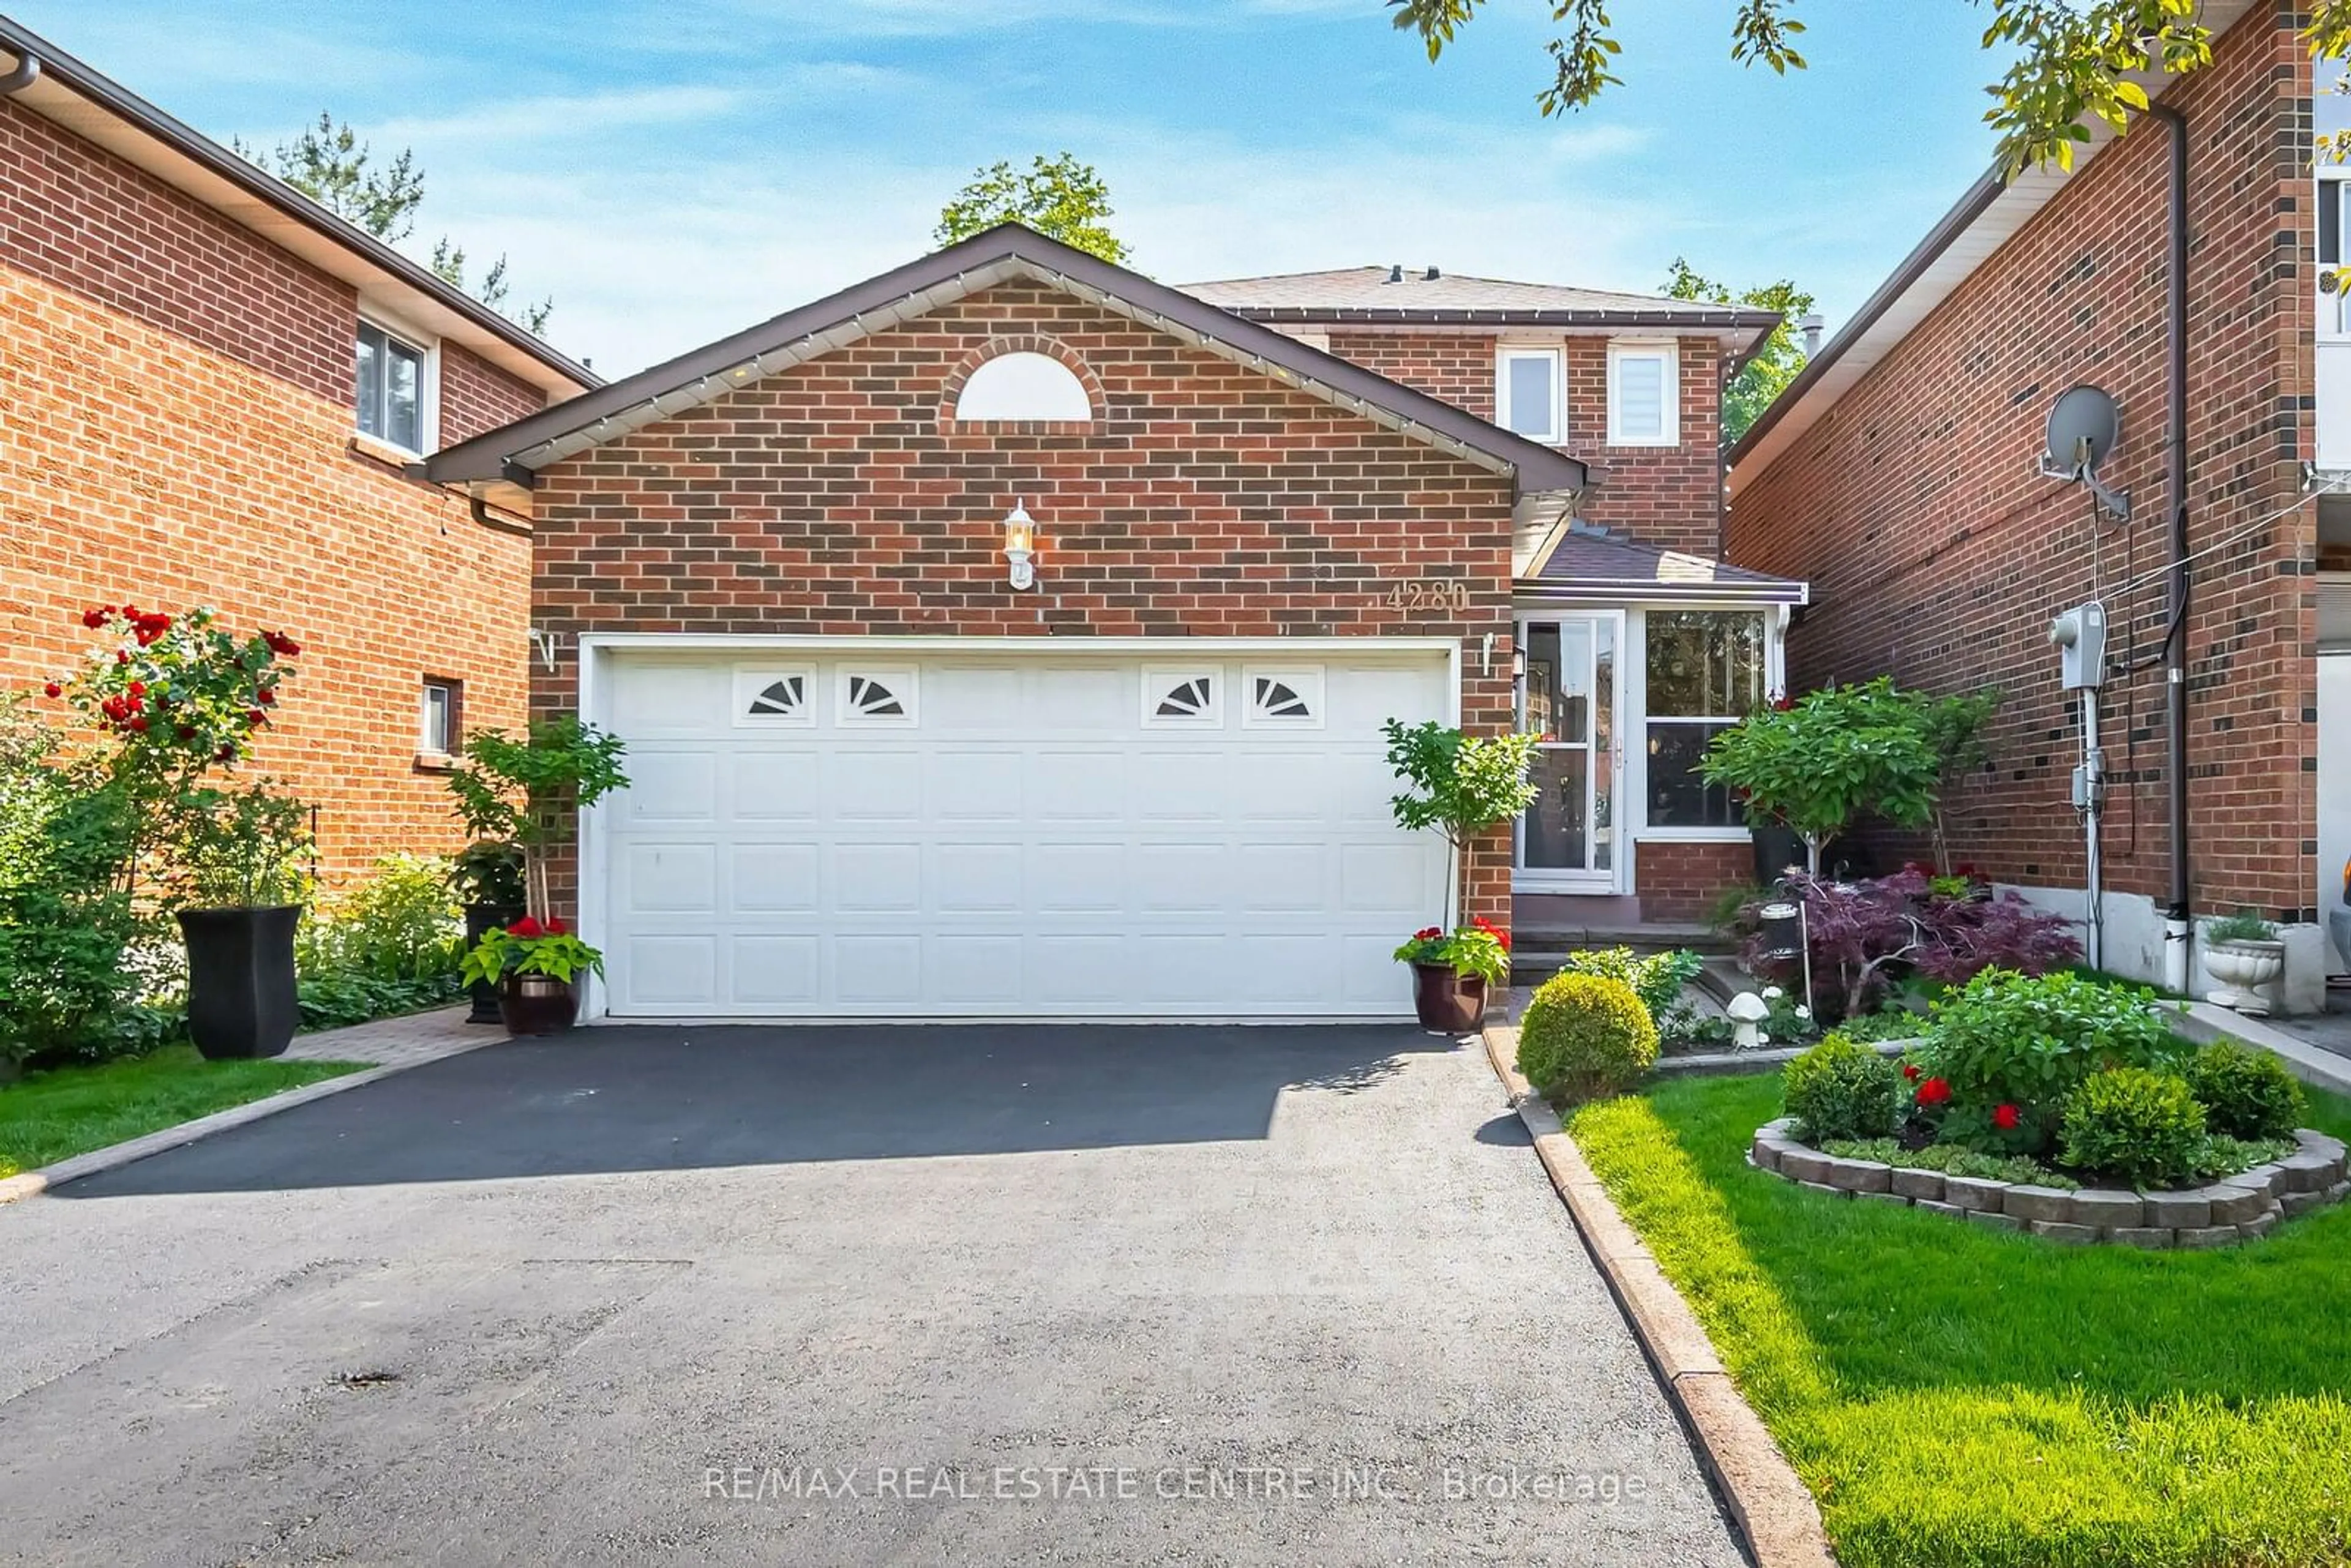 Home with brick exterior material for 4280 Curia Cres, Mississauga Ontario L4Z 2X8